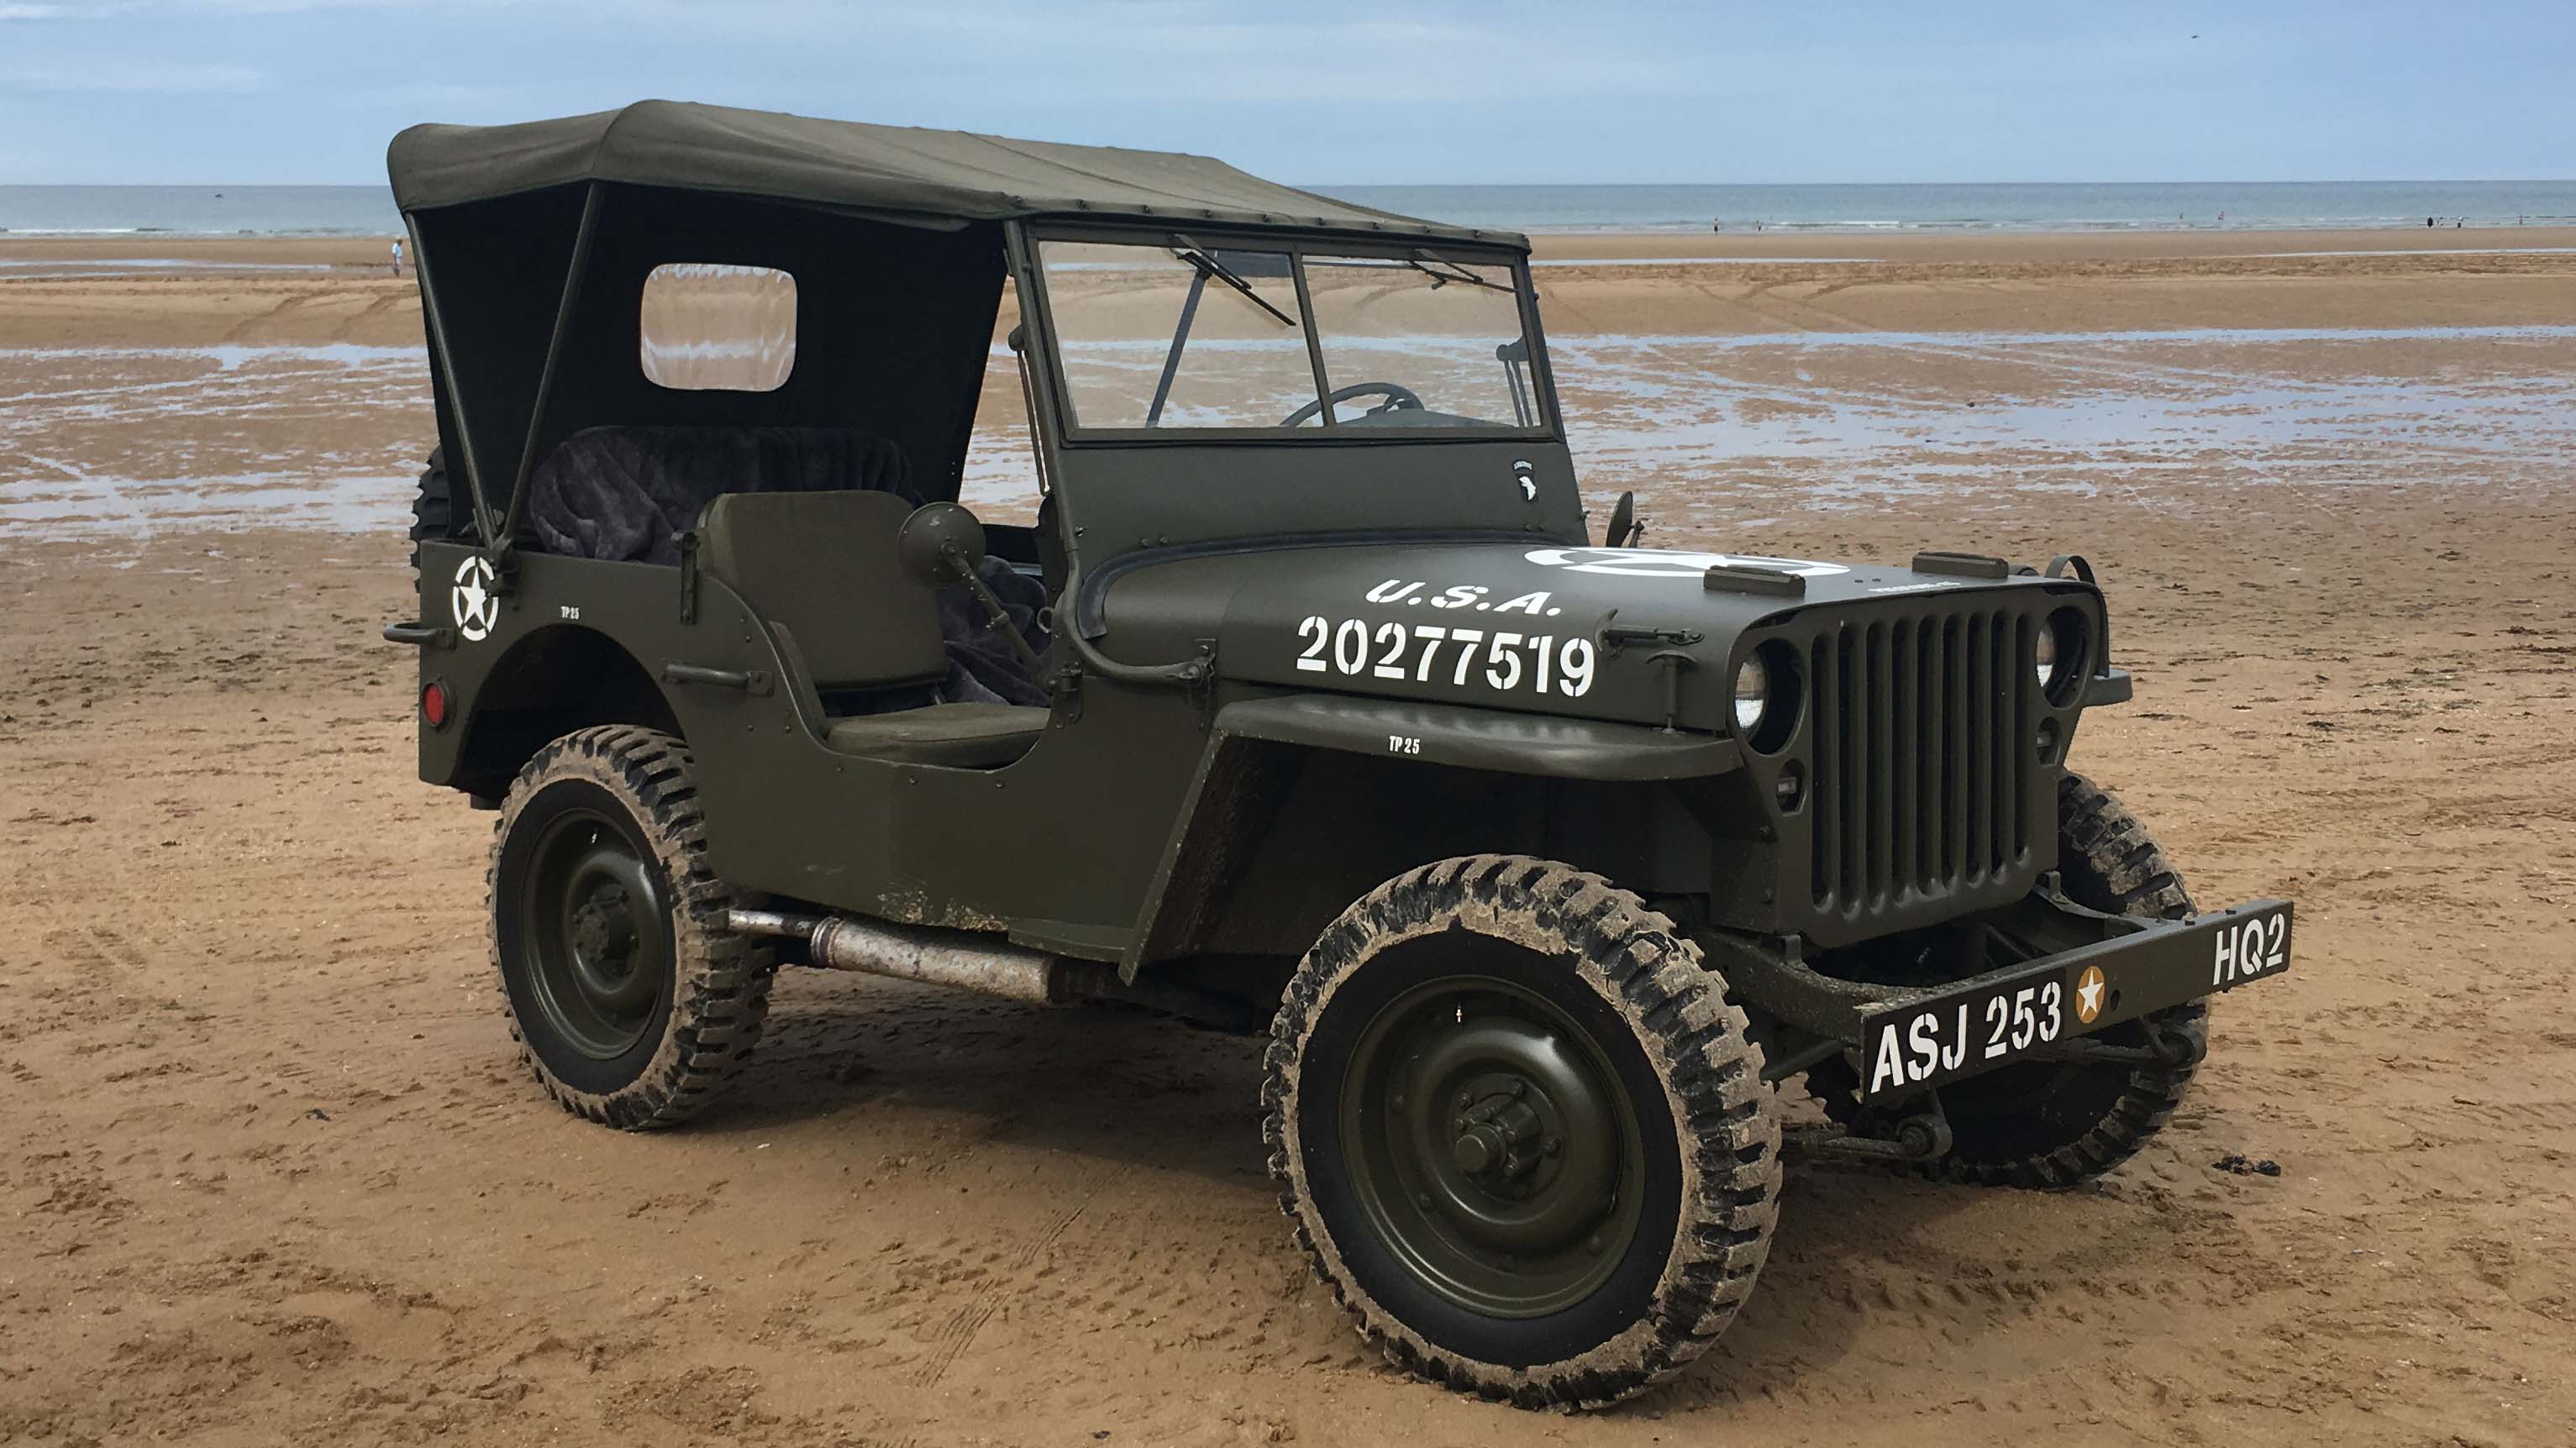 Khaki Green Military Jeep with its roof up on a sandy beack with sea in the background